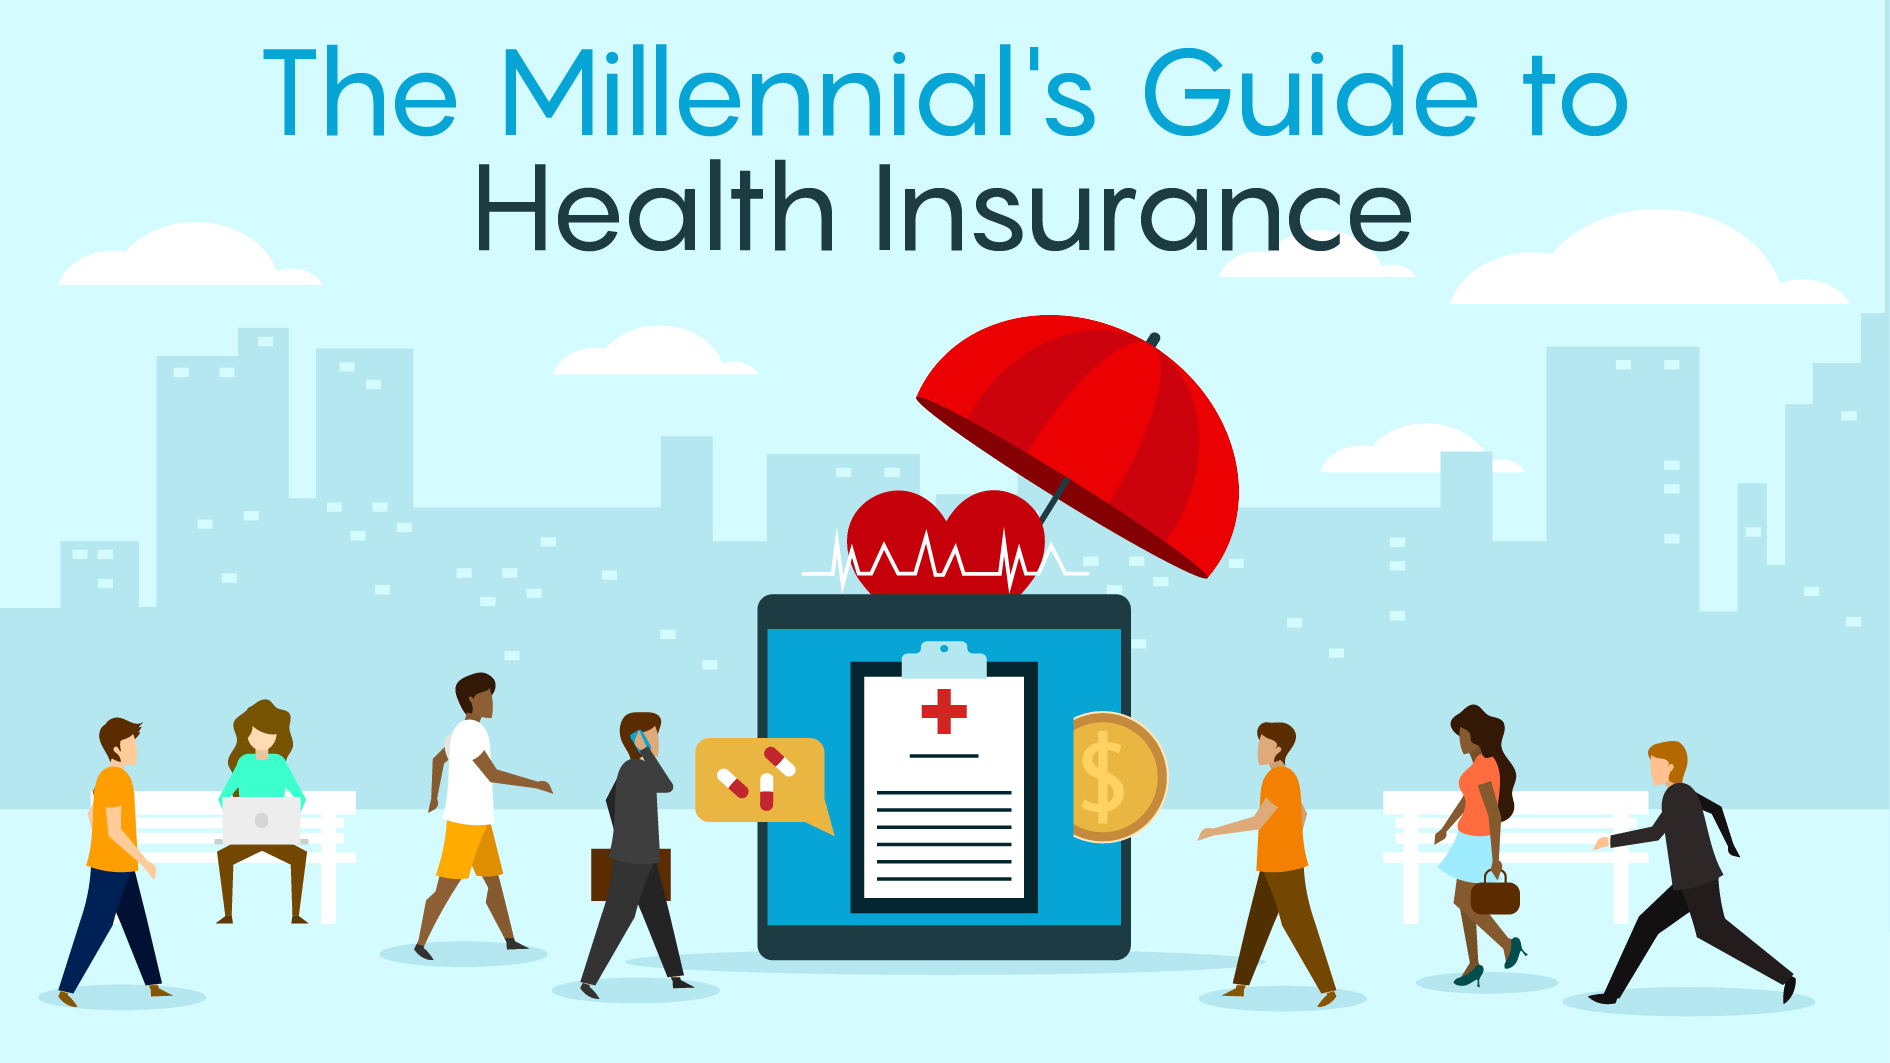 The Millennial’s Guide to Health Insurance